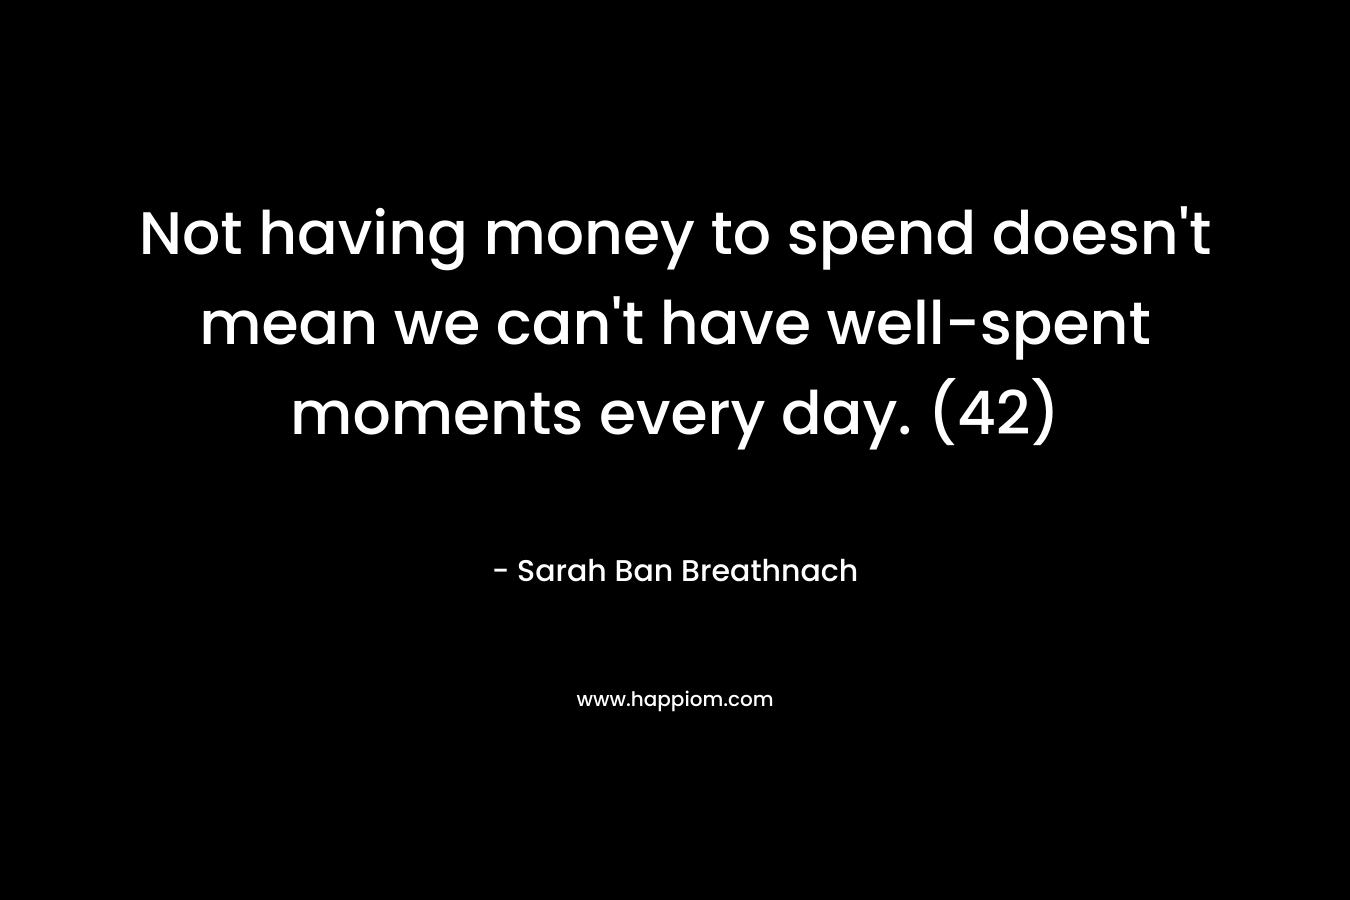 Not having money to spend doesn’t mean we can’t have well-spent moments every day. (42) – Sarah Ban Breathnach